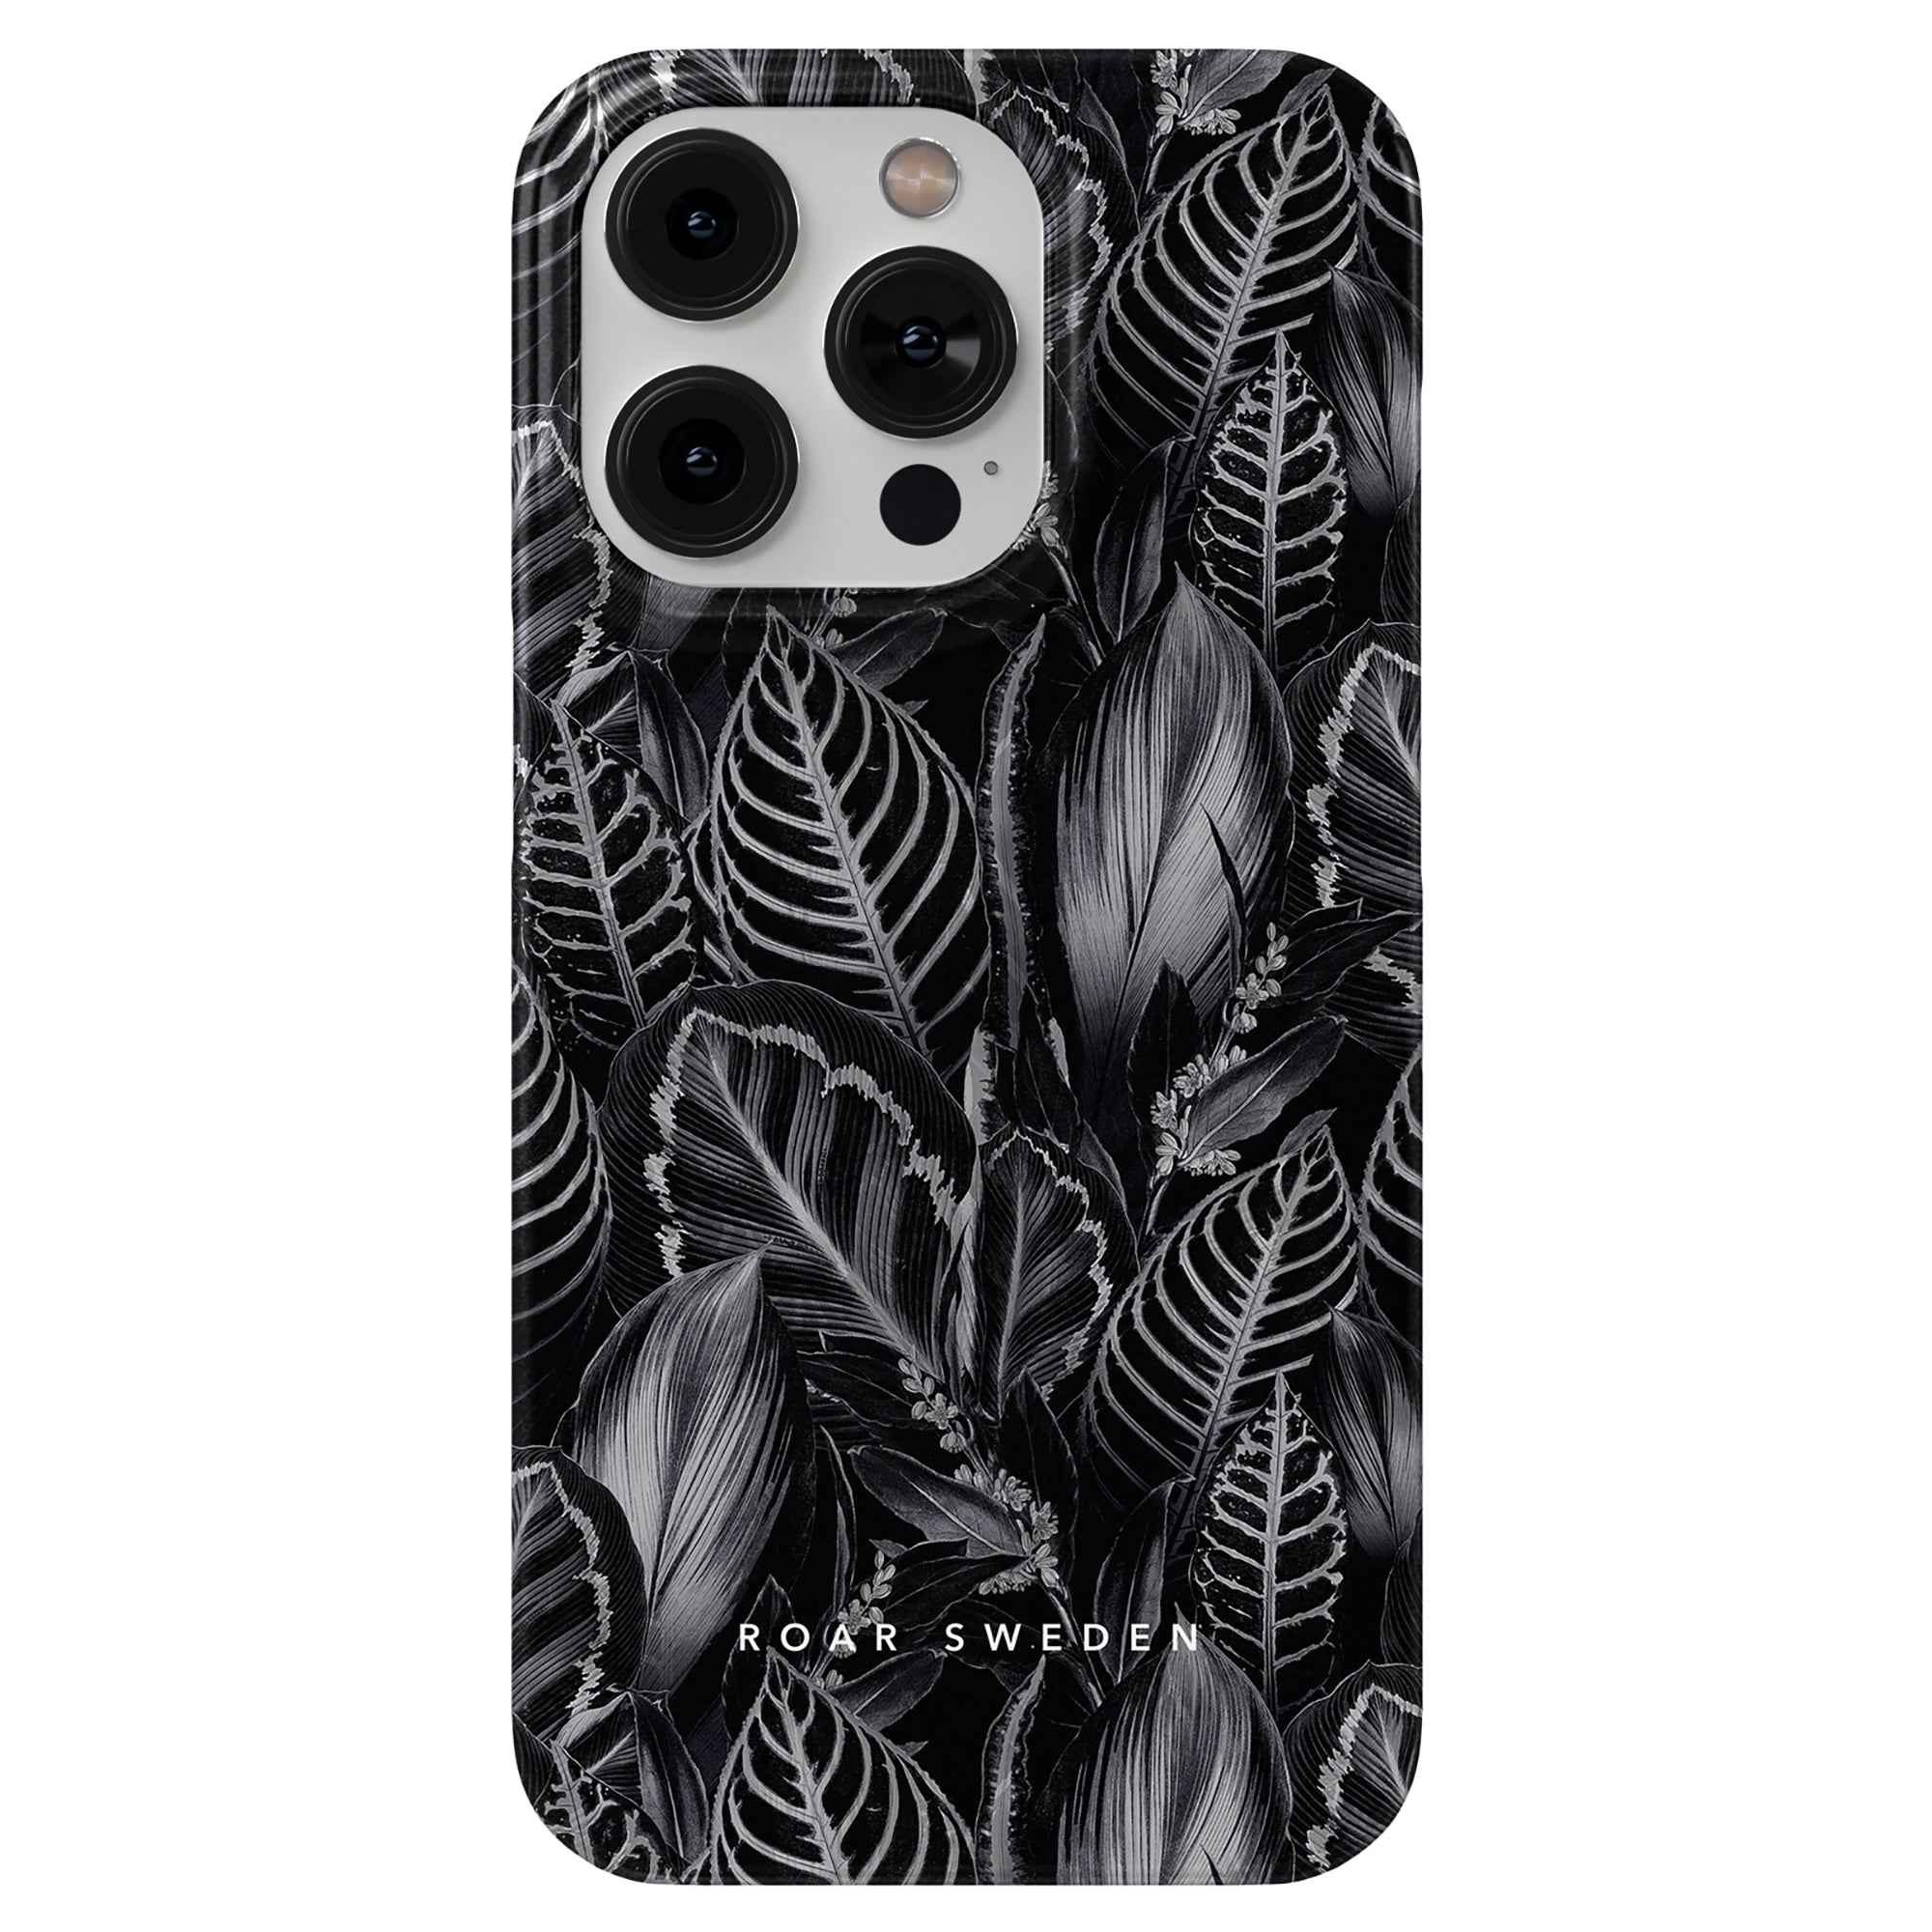 Smartphone with a Dark Leaves - Slim case blending into a matching background, equipped with a fitness tracker app that monitors heart rate.